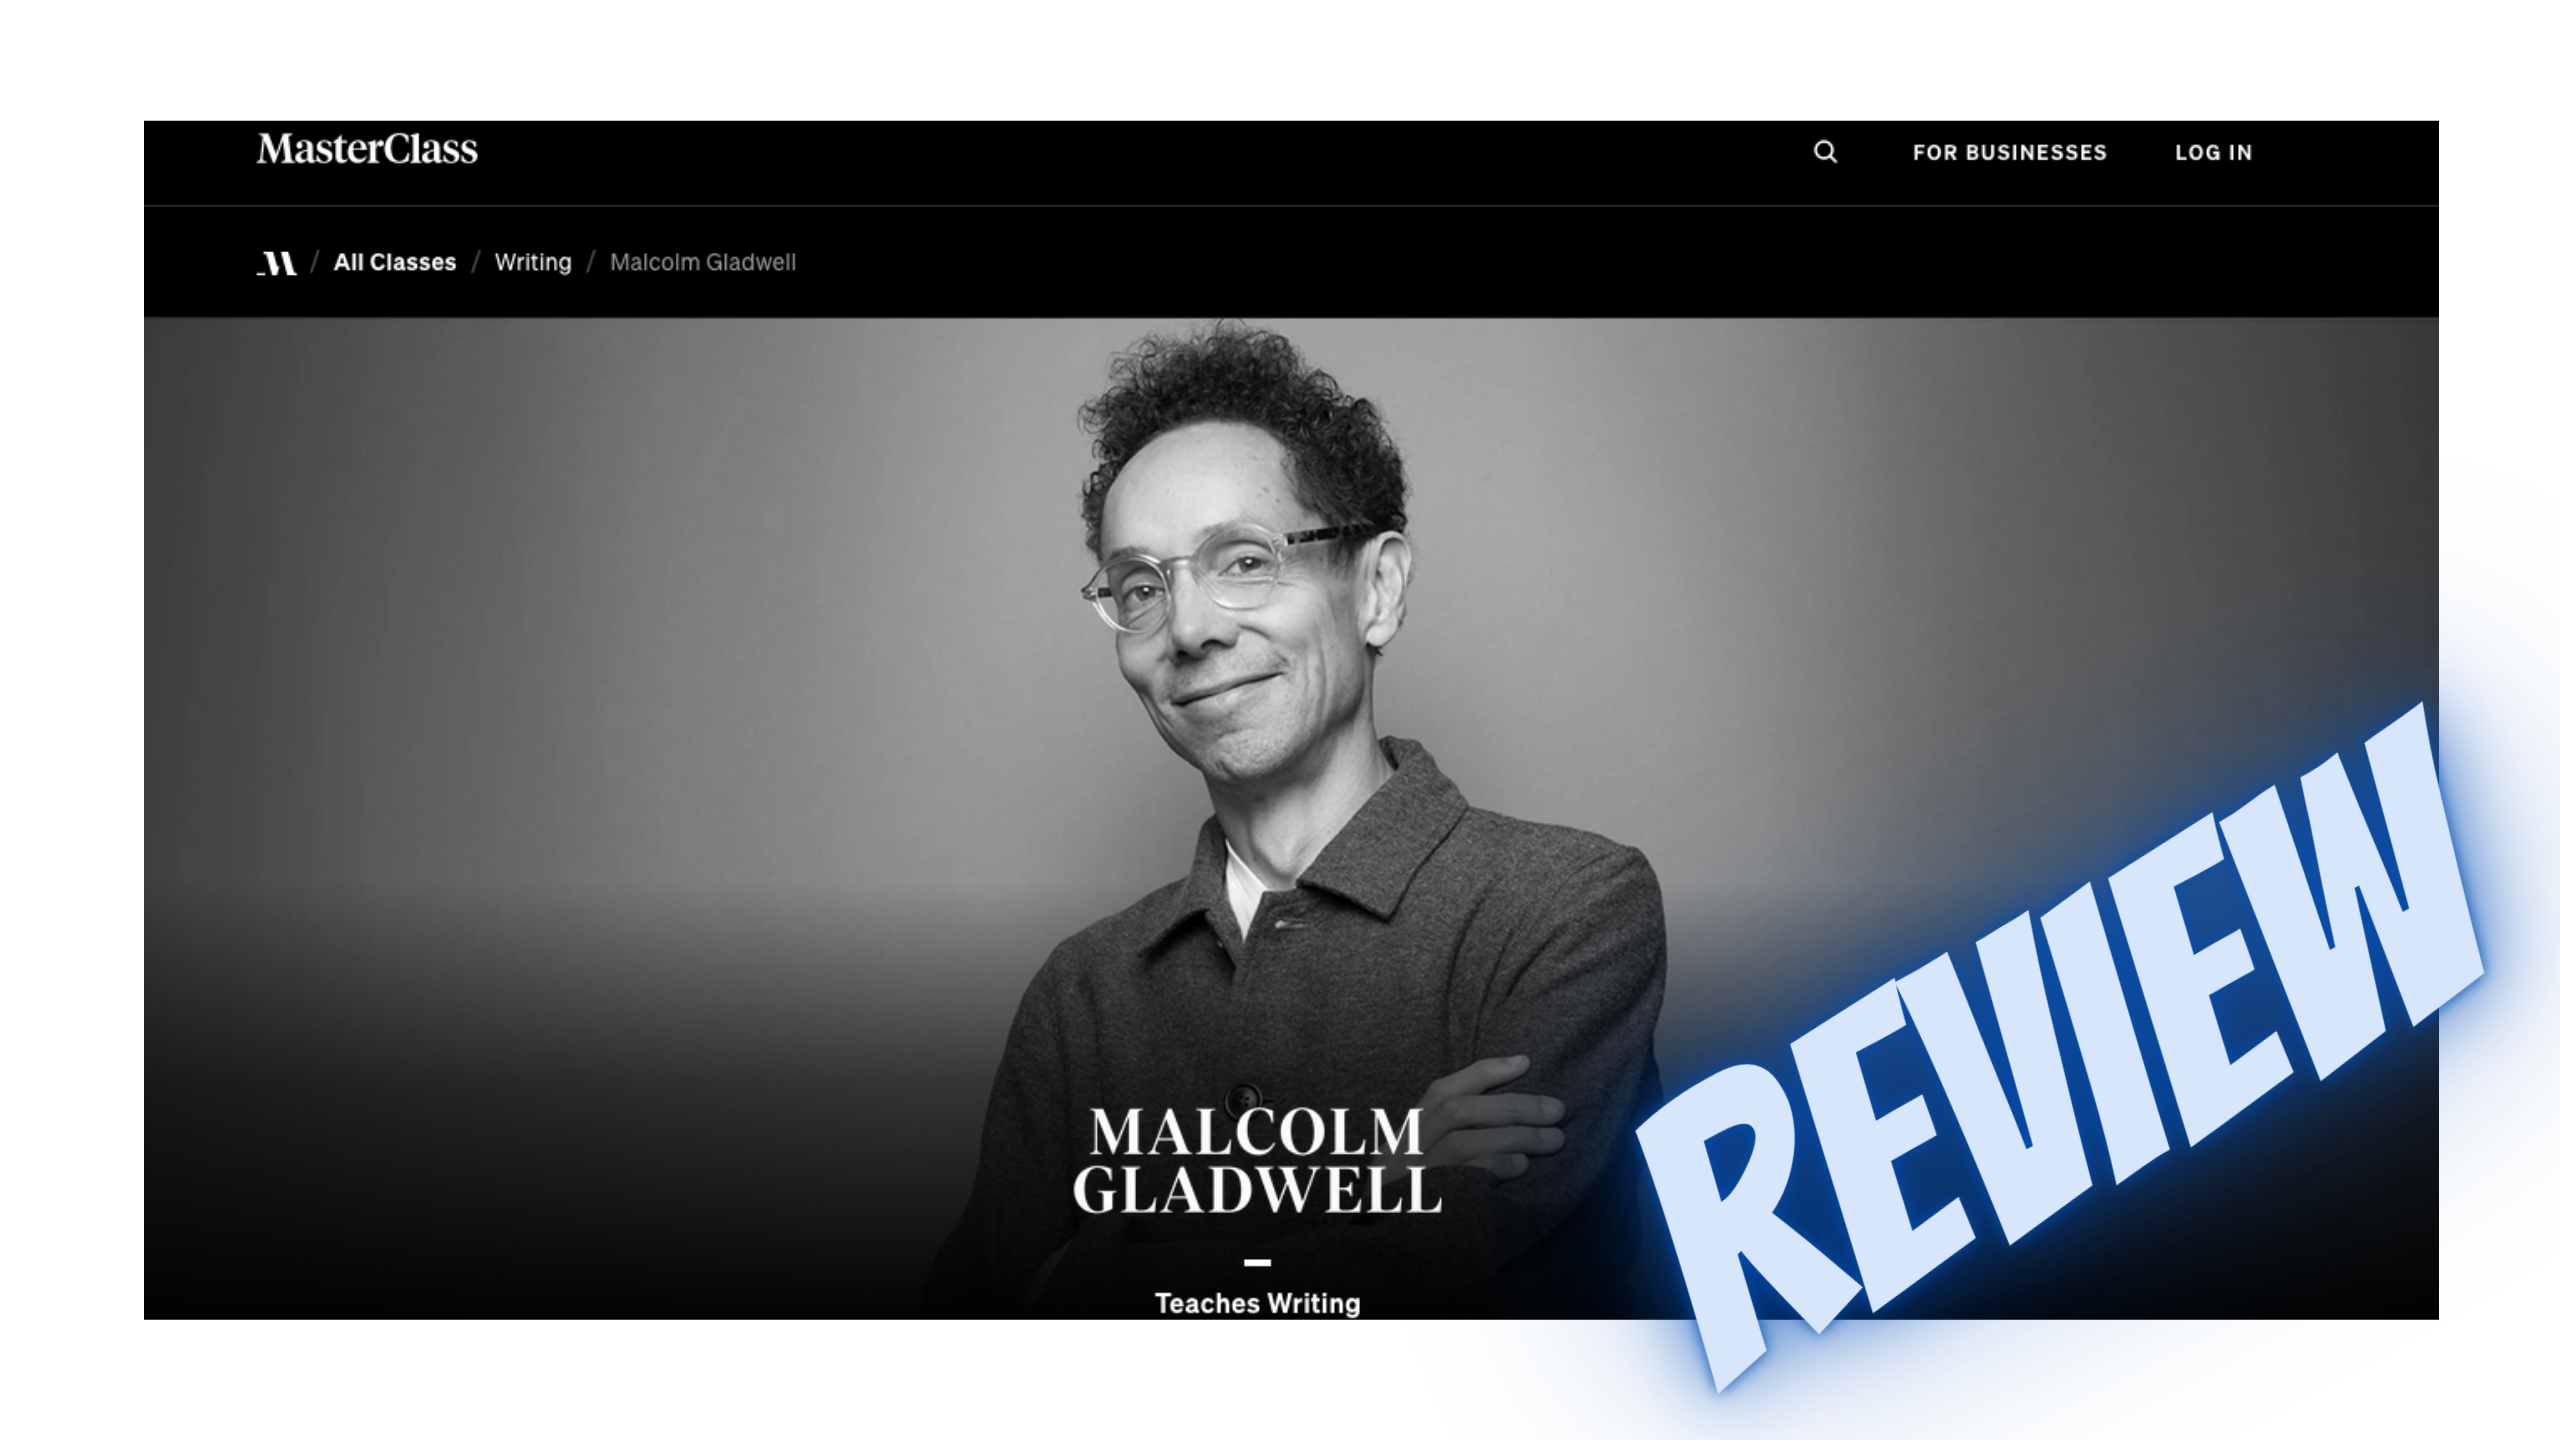 Malcolm Gladwell Masterclass Review 2022: Will It Make You A Better Writer?